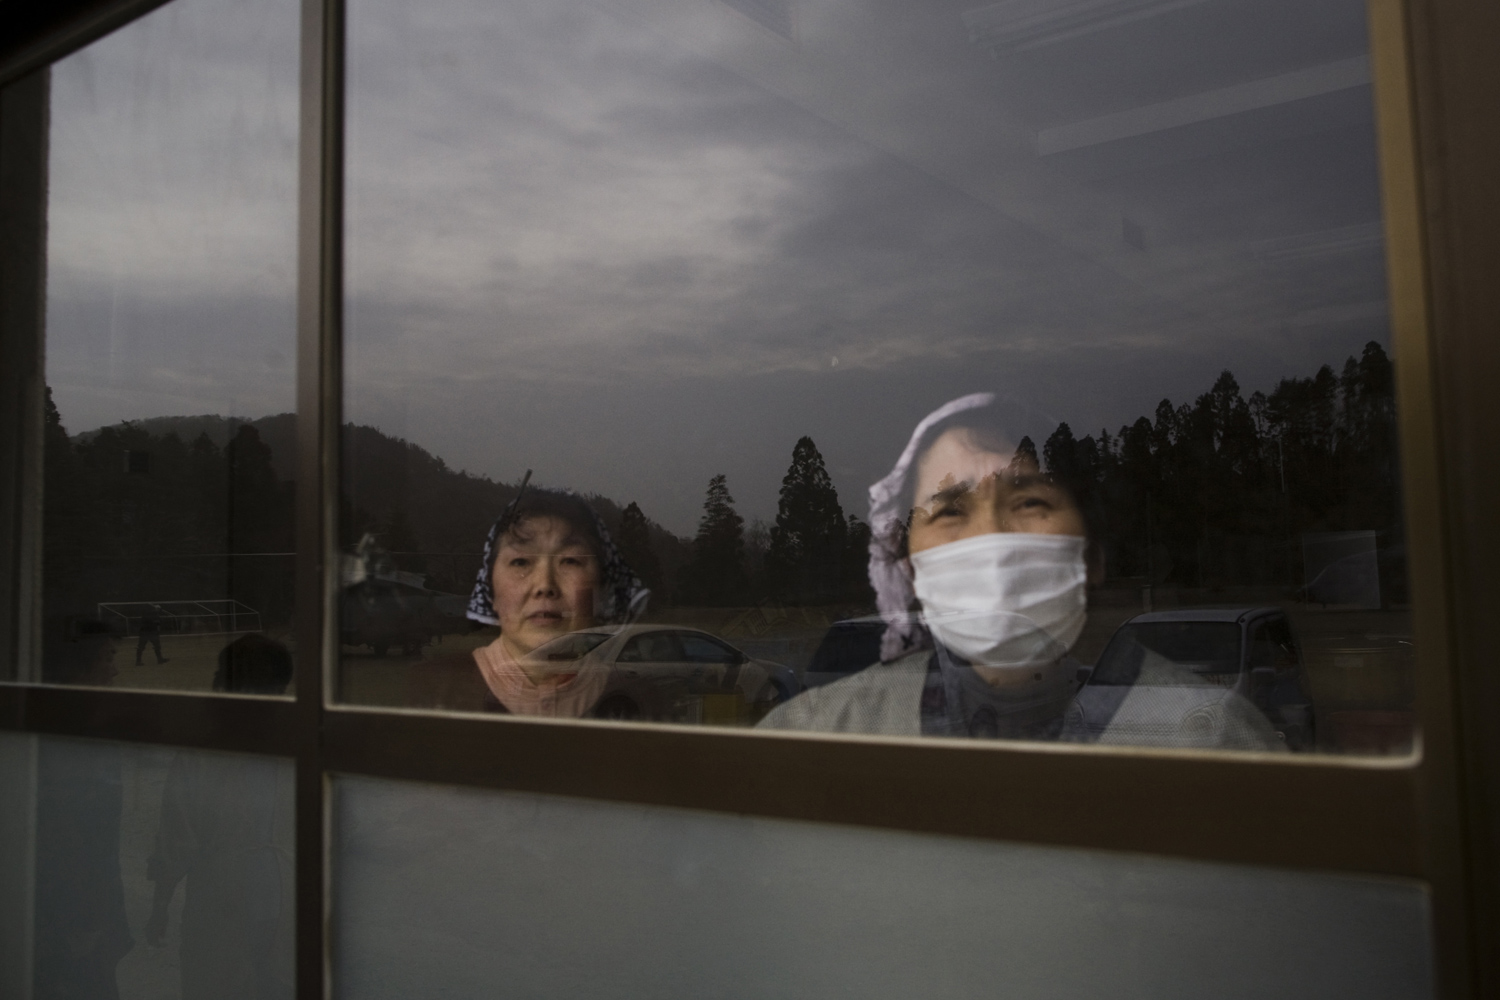 Women taking refuge at a school in a part of the Sendai region that was badly damaged in the earthquake and tsunami. March 21, 2011